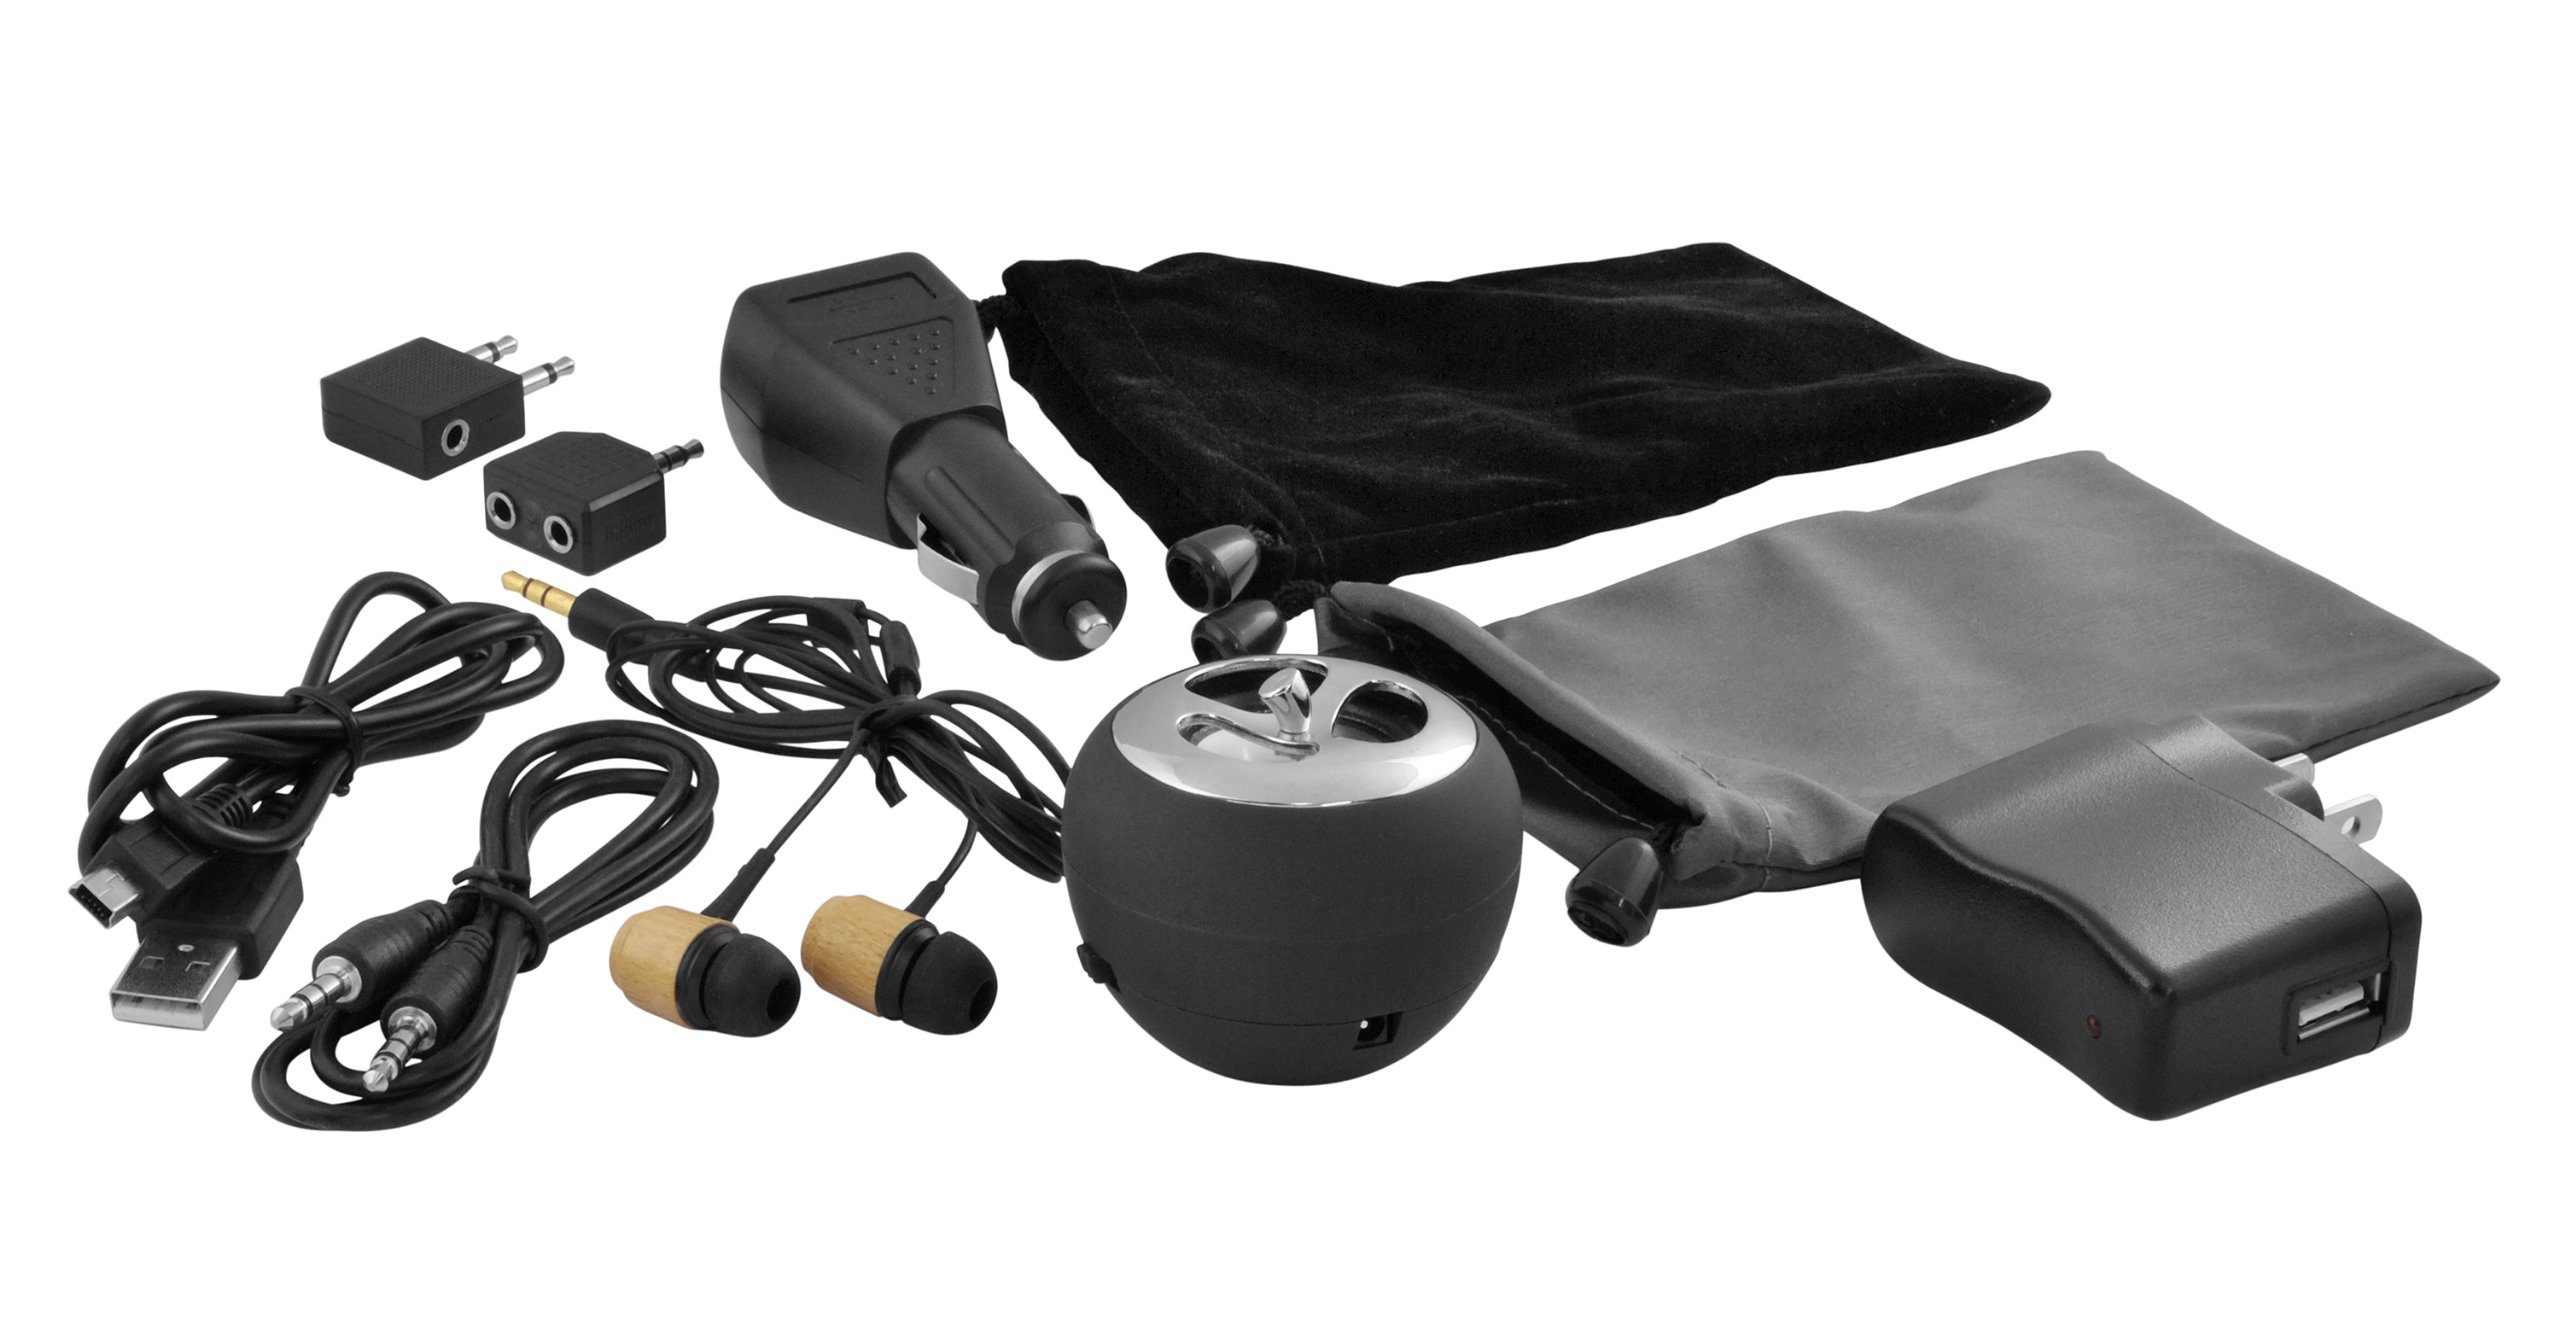 iPod Accessory, Ematic 11 in 1 iPod MP3 Accessory Kit with Wood Earbuds and Portable Speaker [ EI030 ]